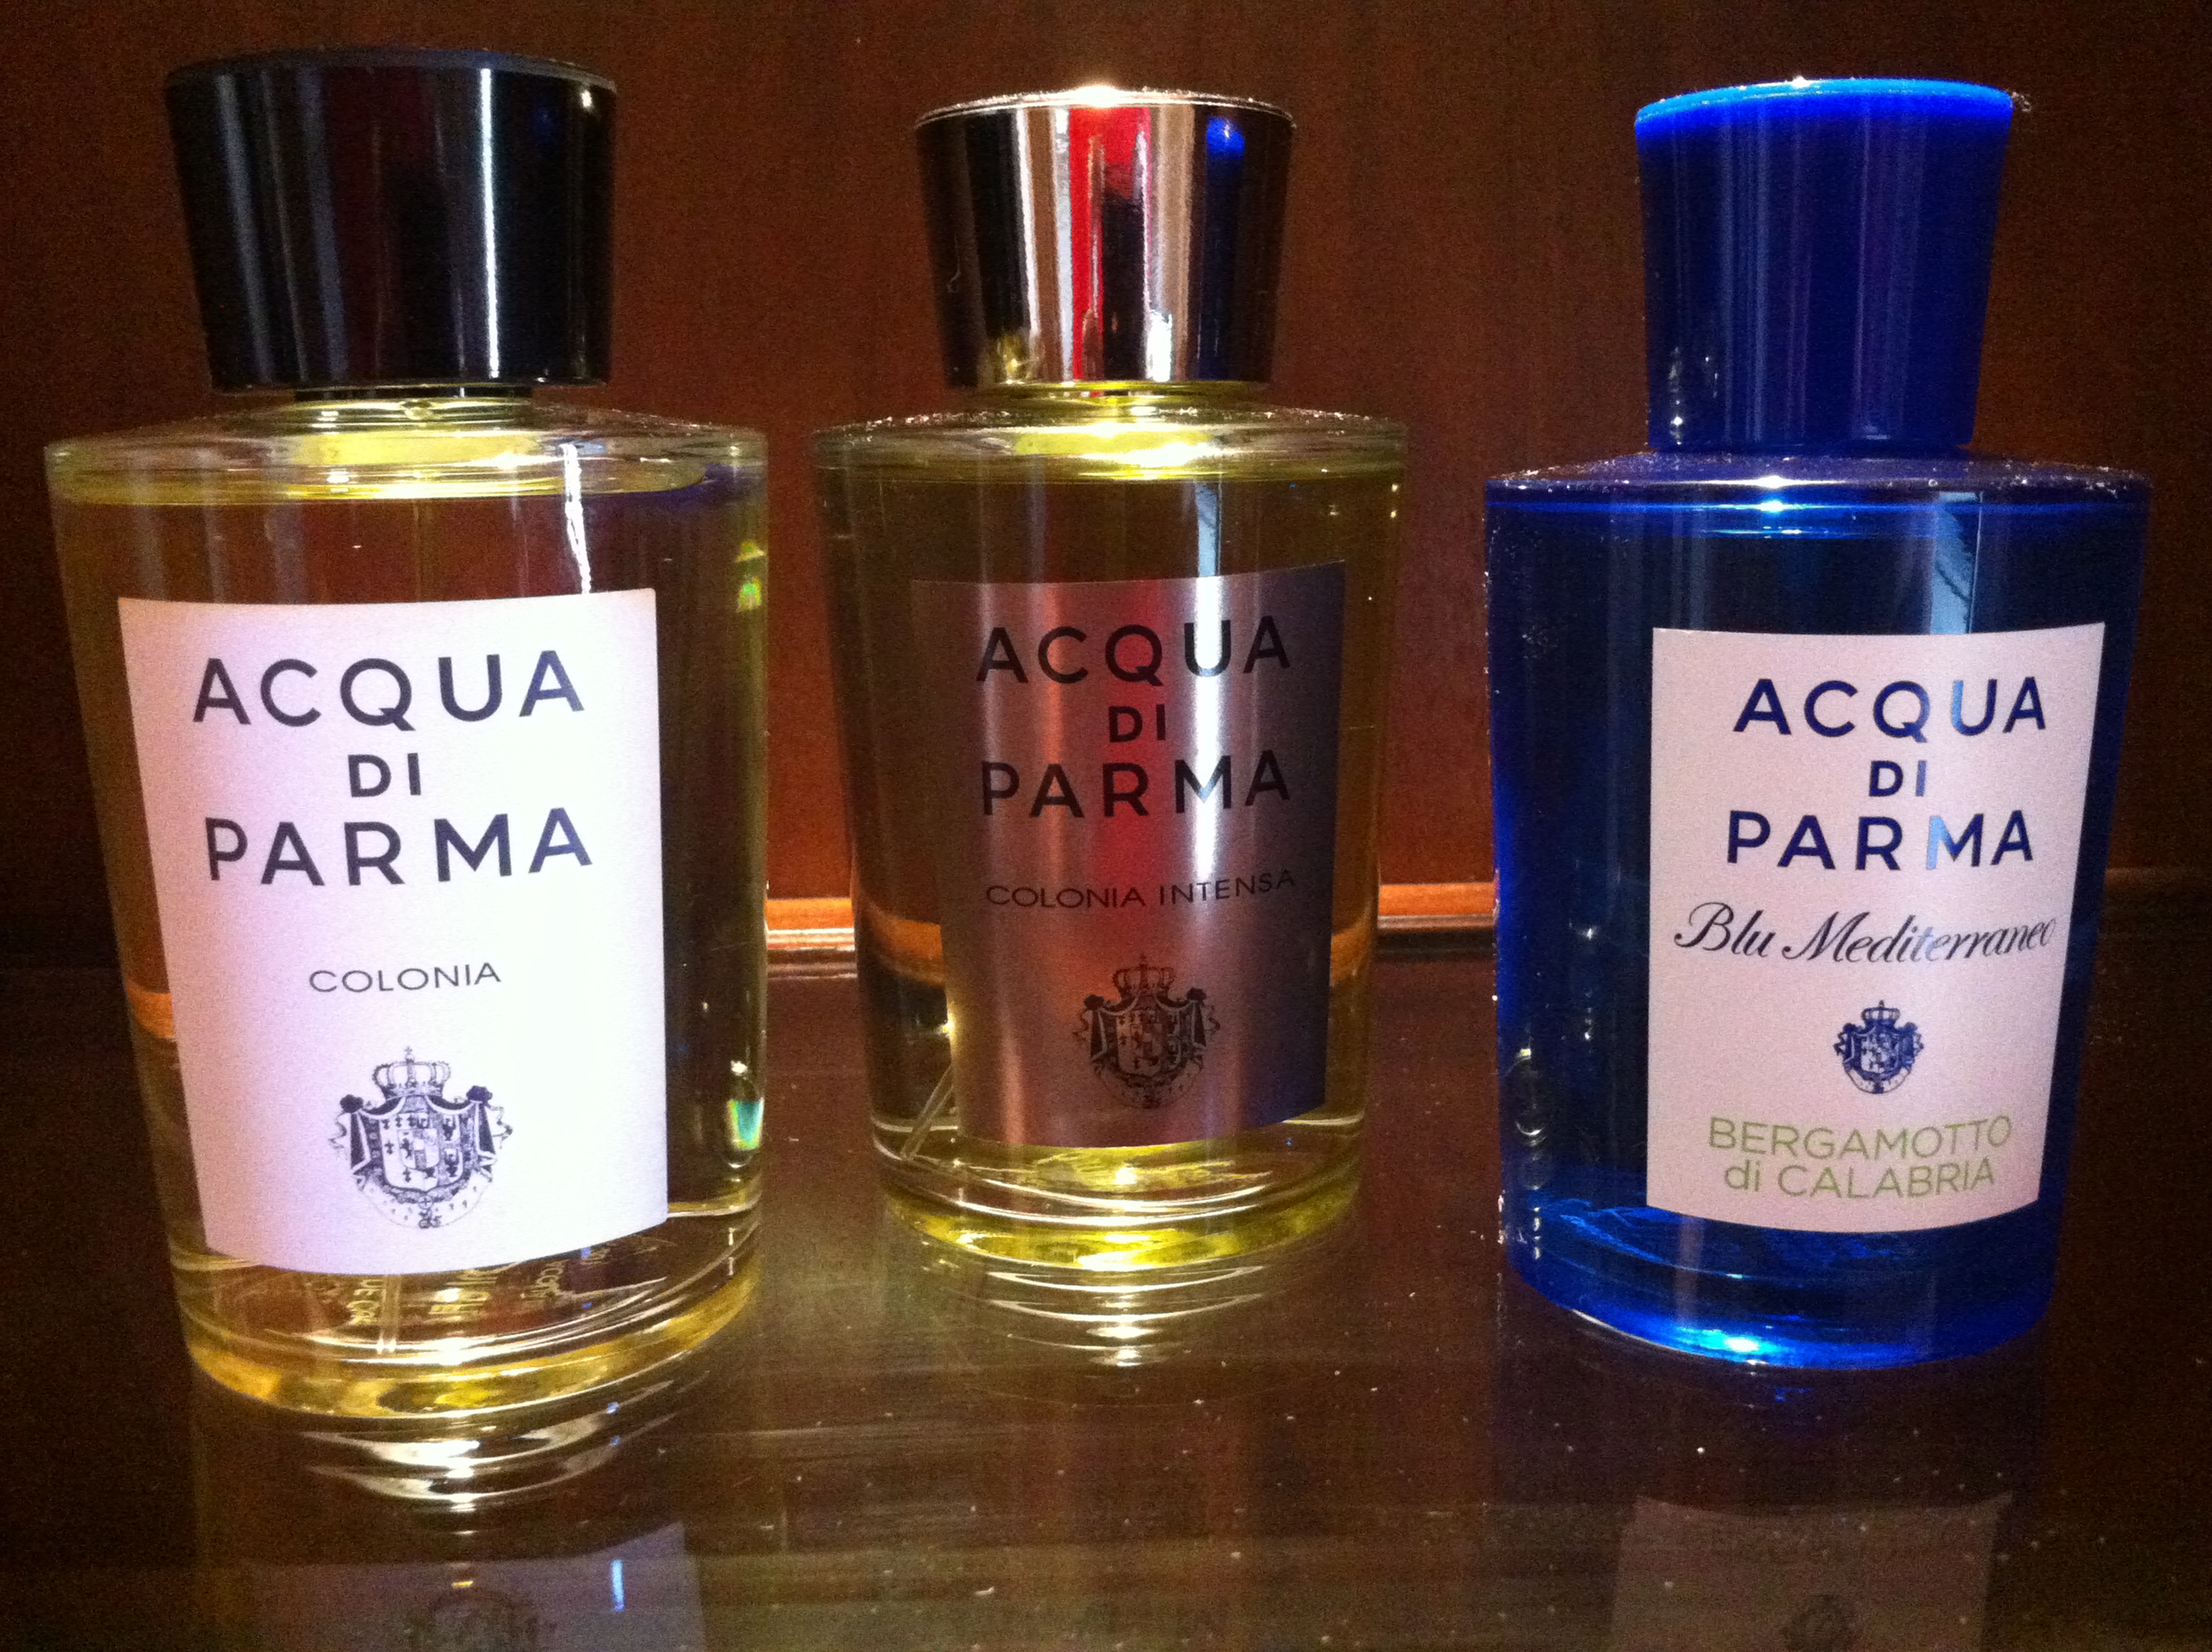 StayHome with Acqua di Parma: donating 100% of online revenue to charity -  The Perfume Society